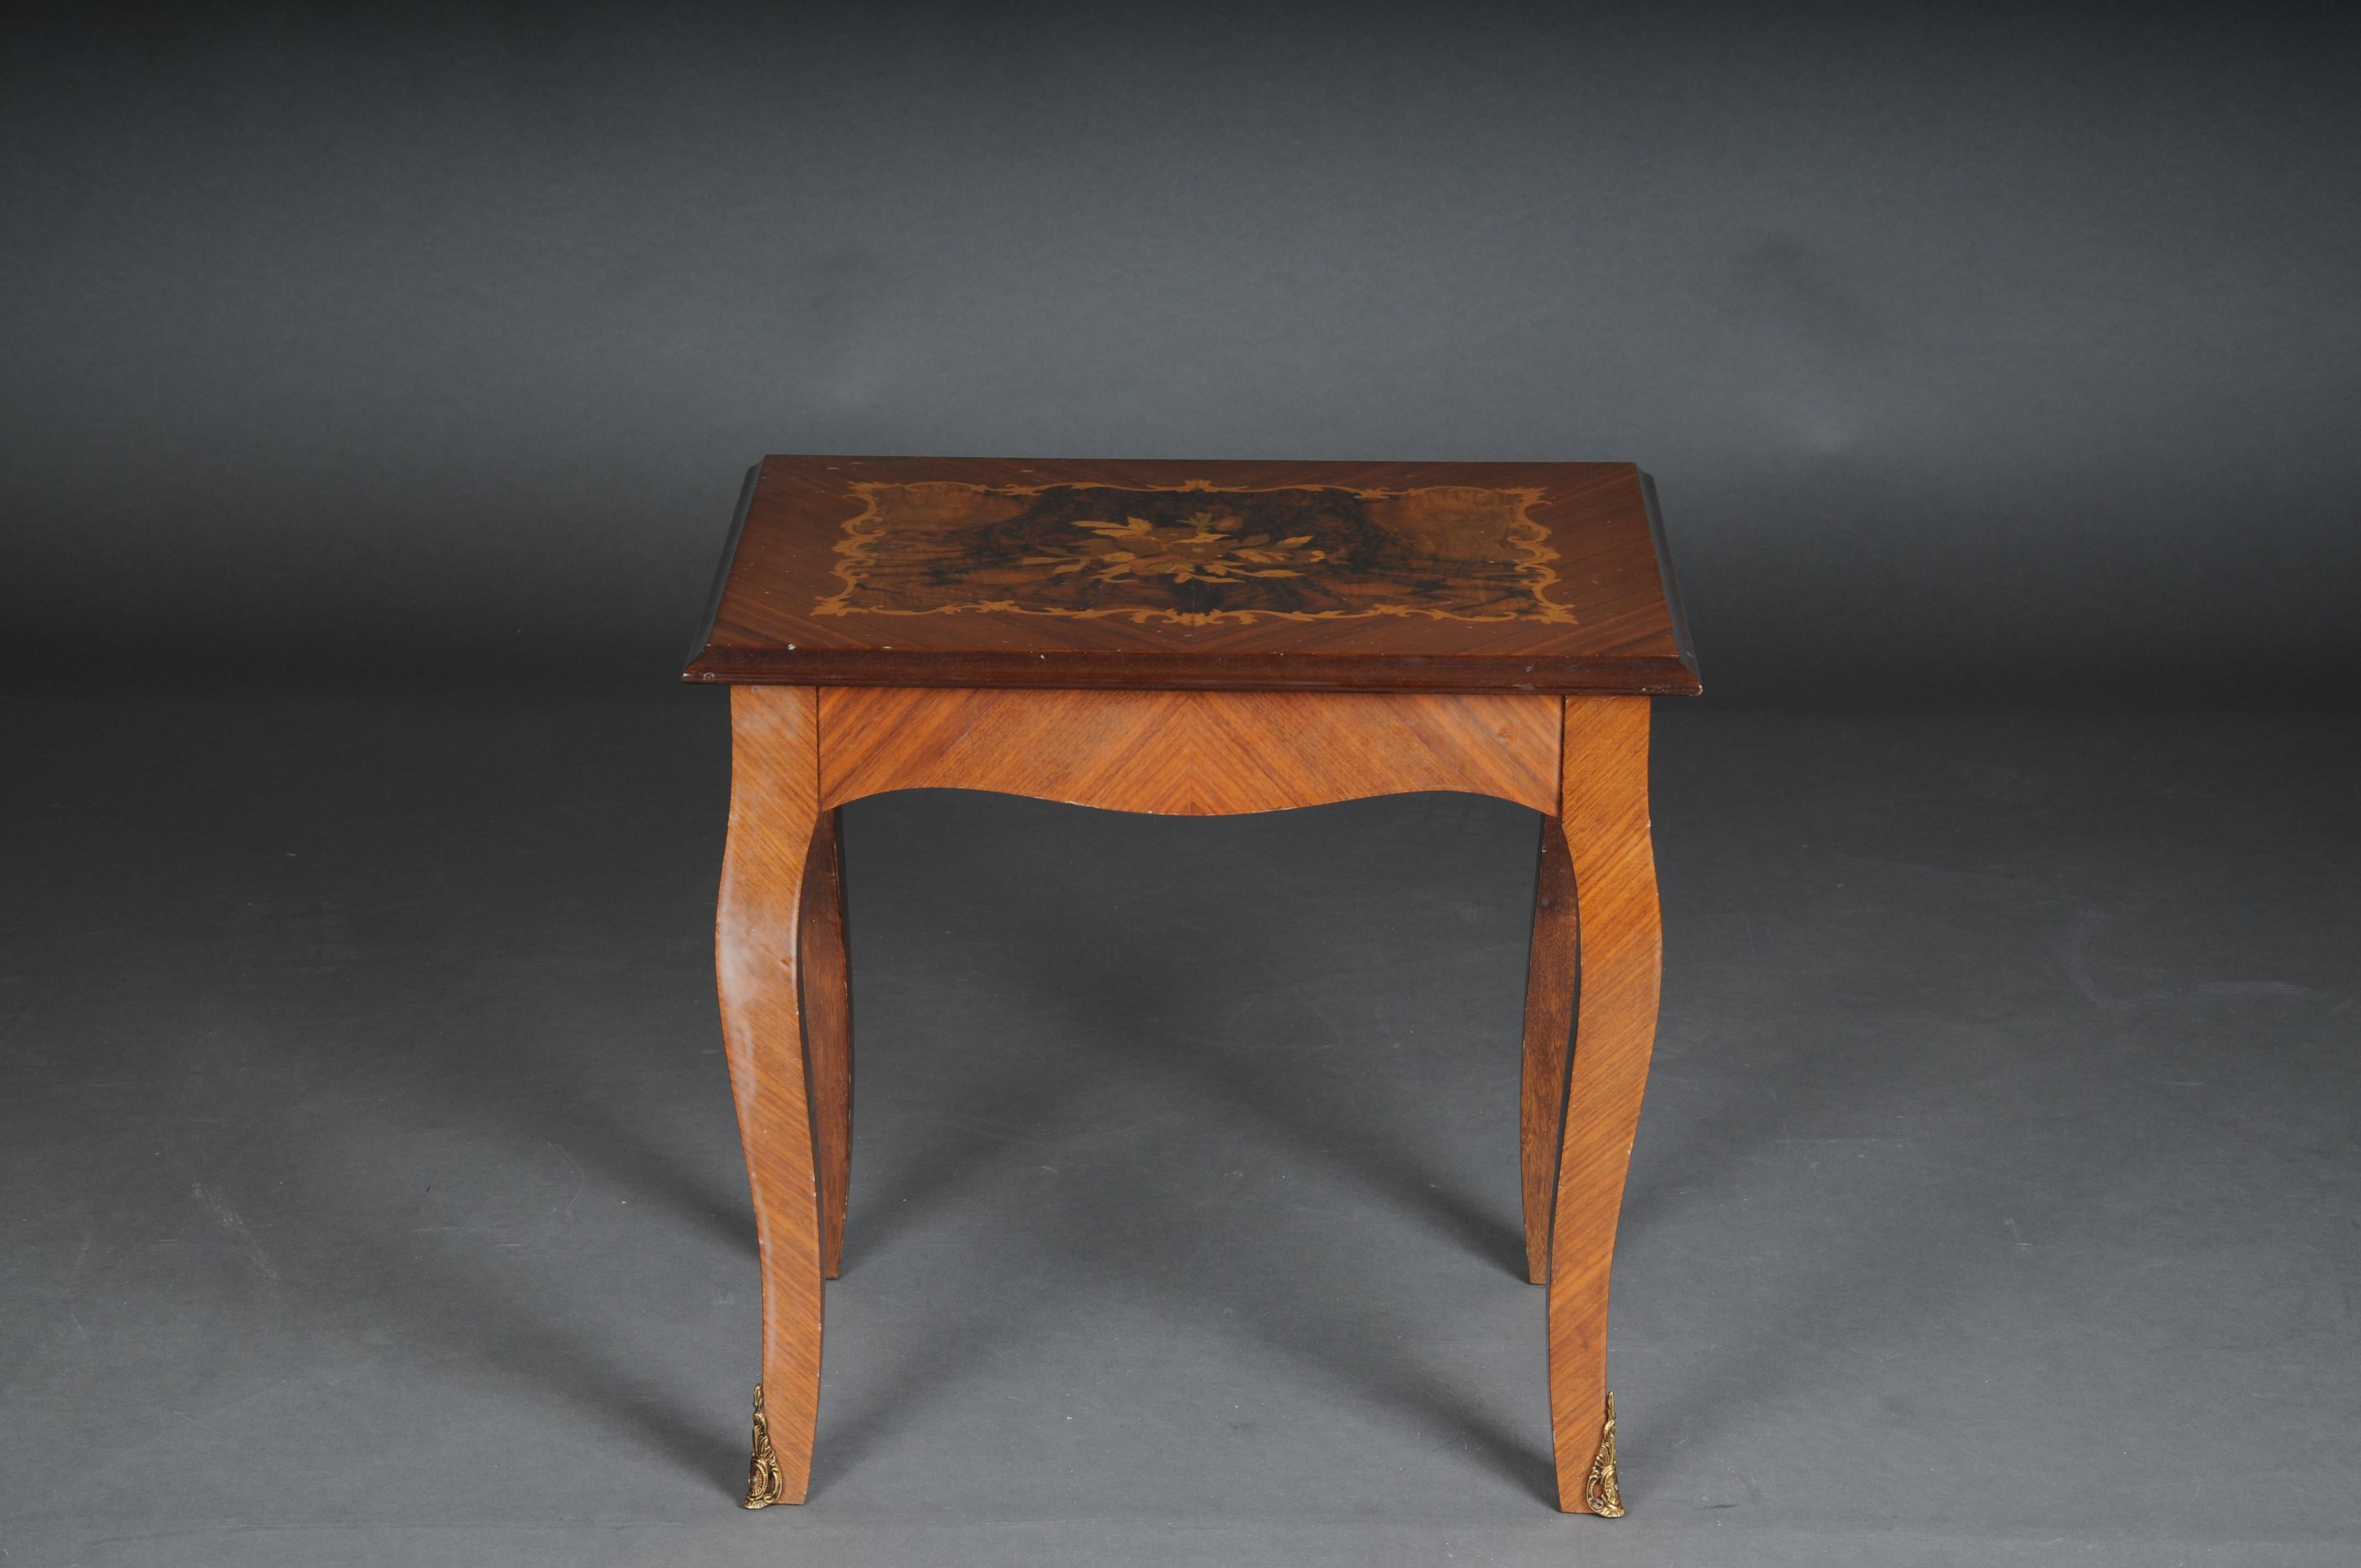 20th Century inlaid baroque side table
Solid wood body veneer. Rich marquetry plate.